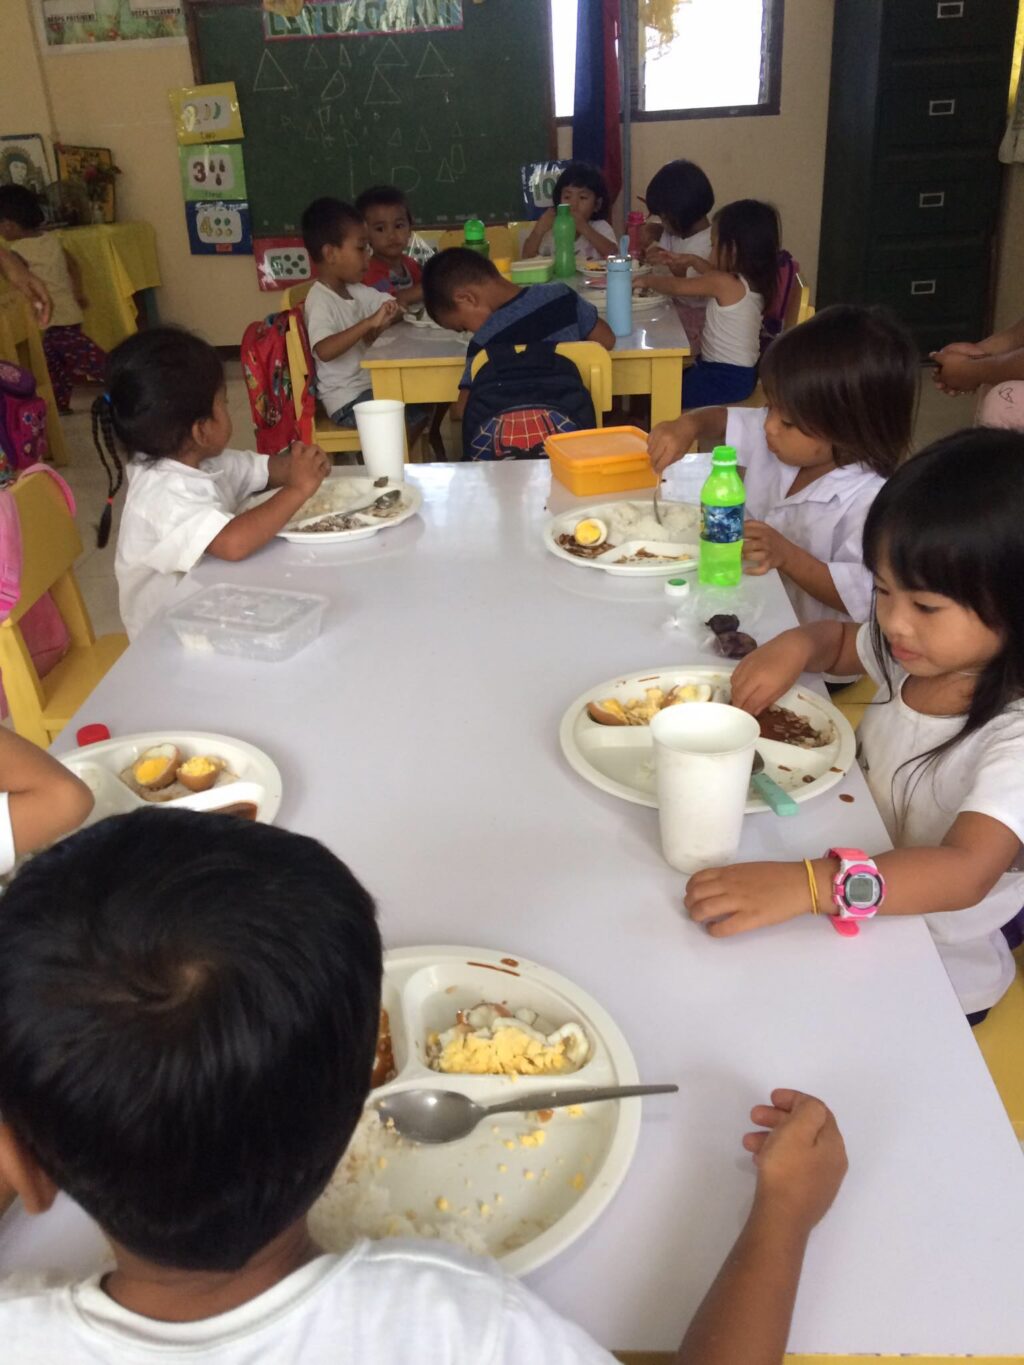 Chipping away at malnutrition: Is feeding 79,000 kids for 120 days in Cebu province enough for now?